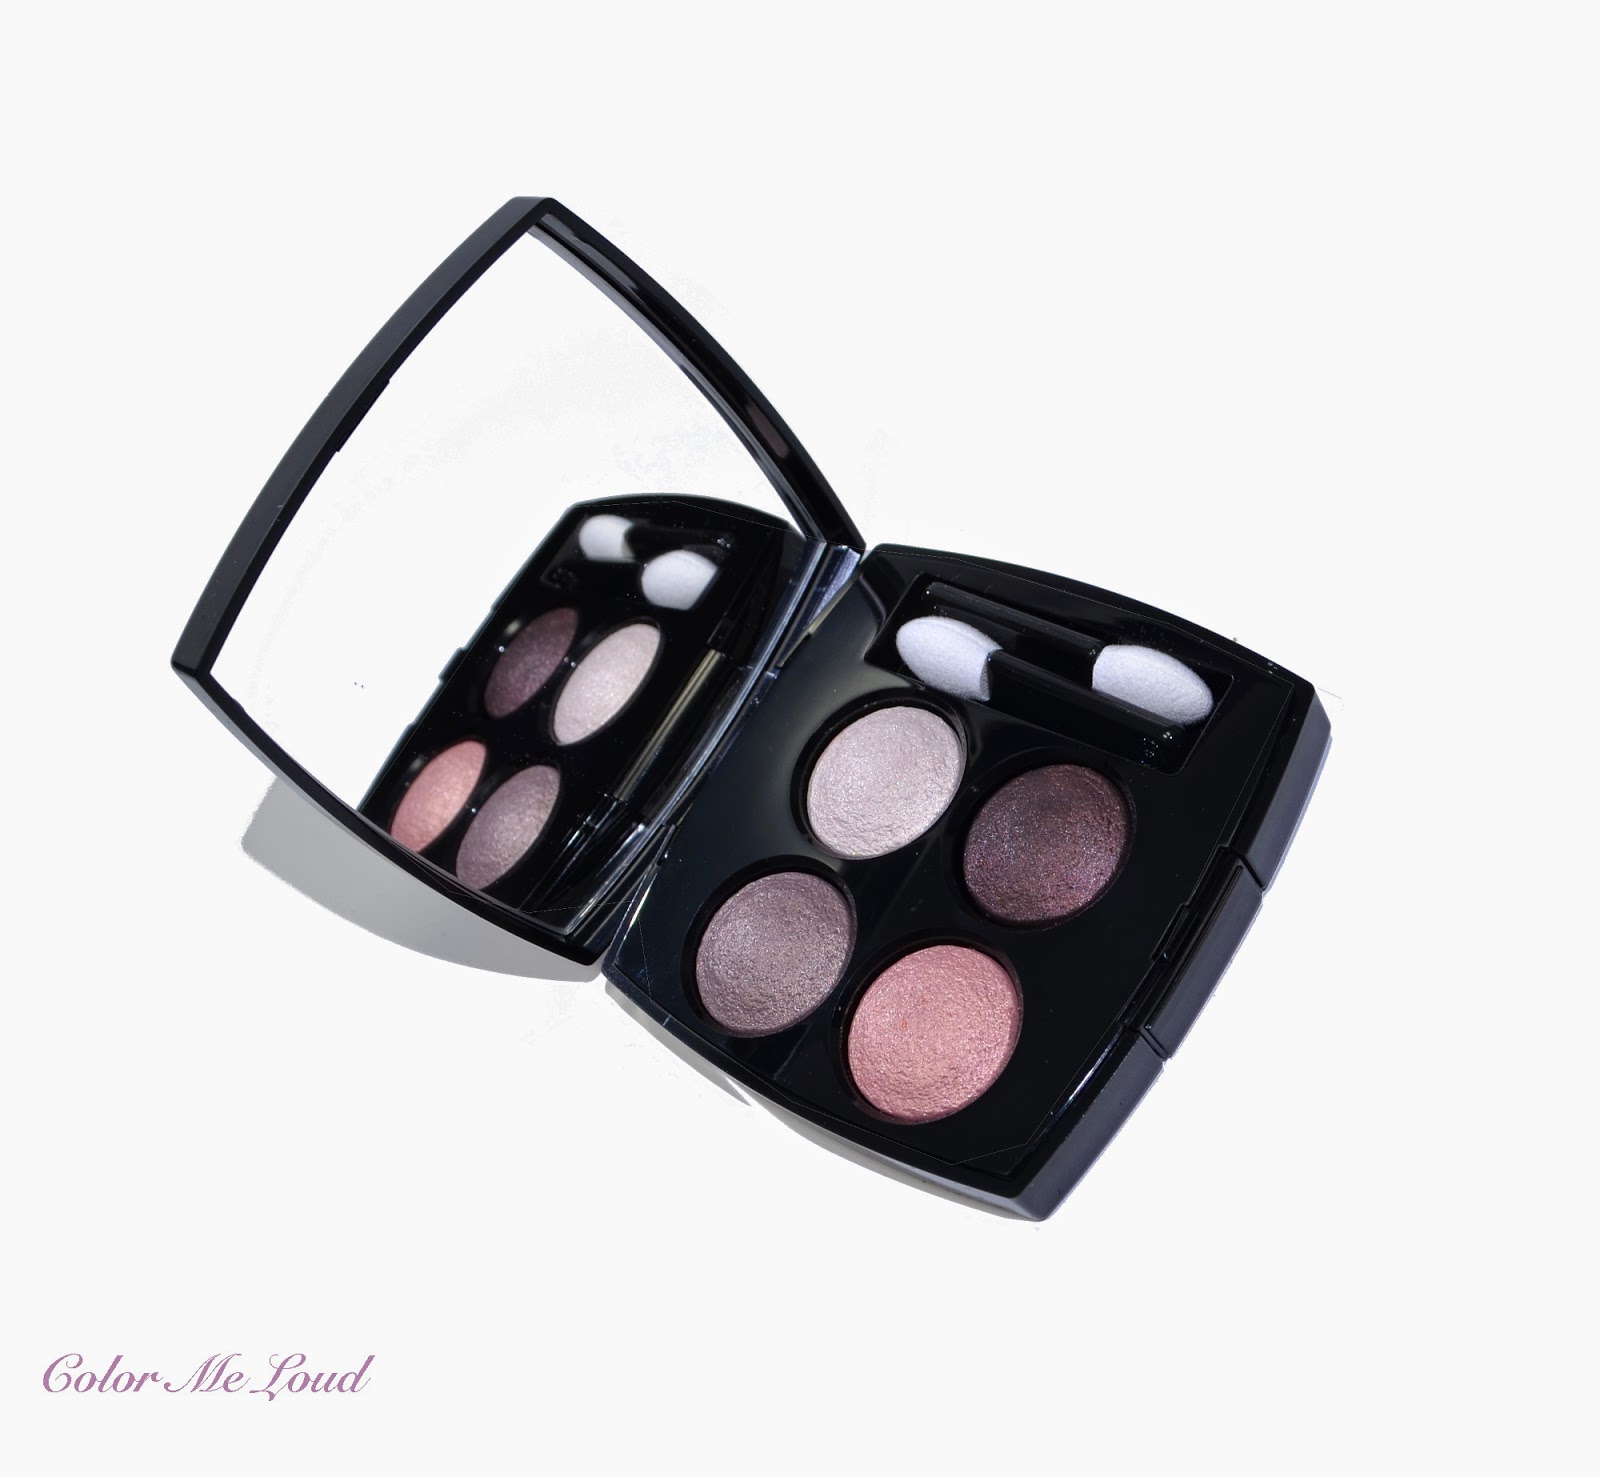 Review: Chanel Les 4 Ombres Multi-Effect Quadra Eyeshadow in 204